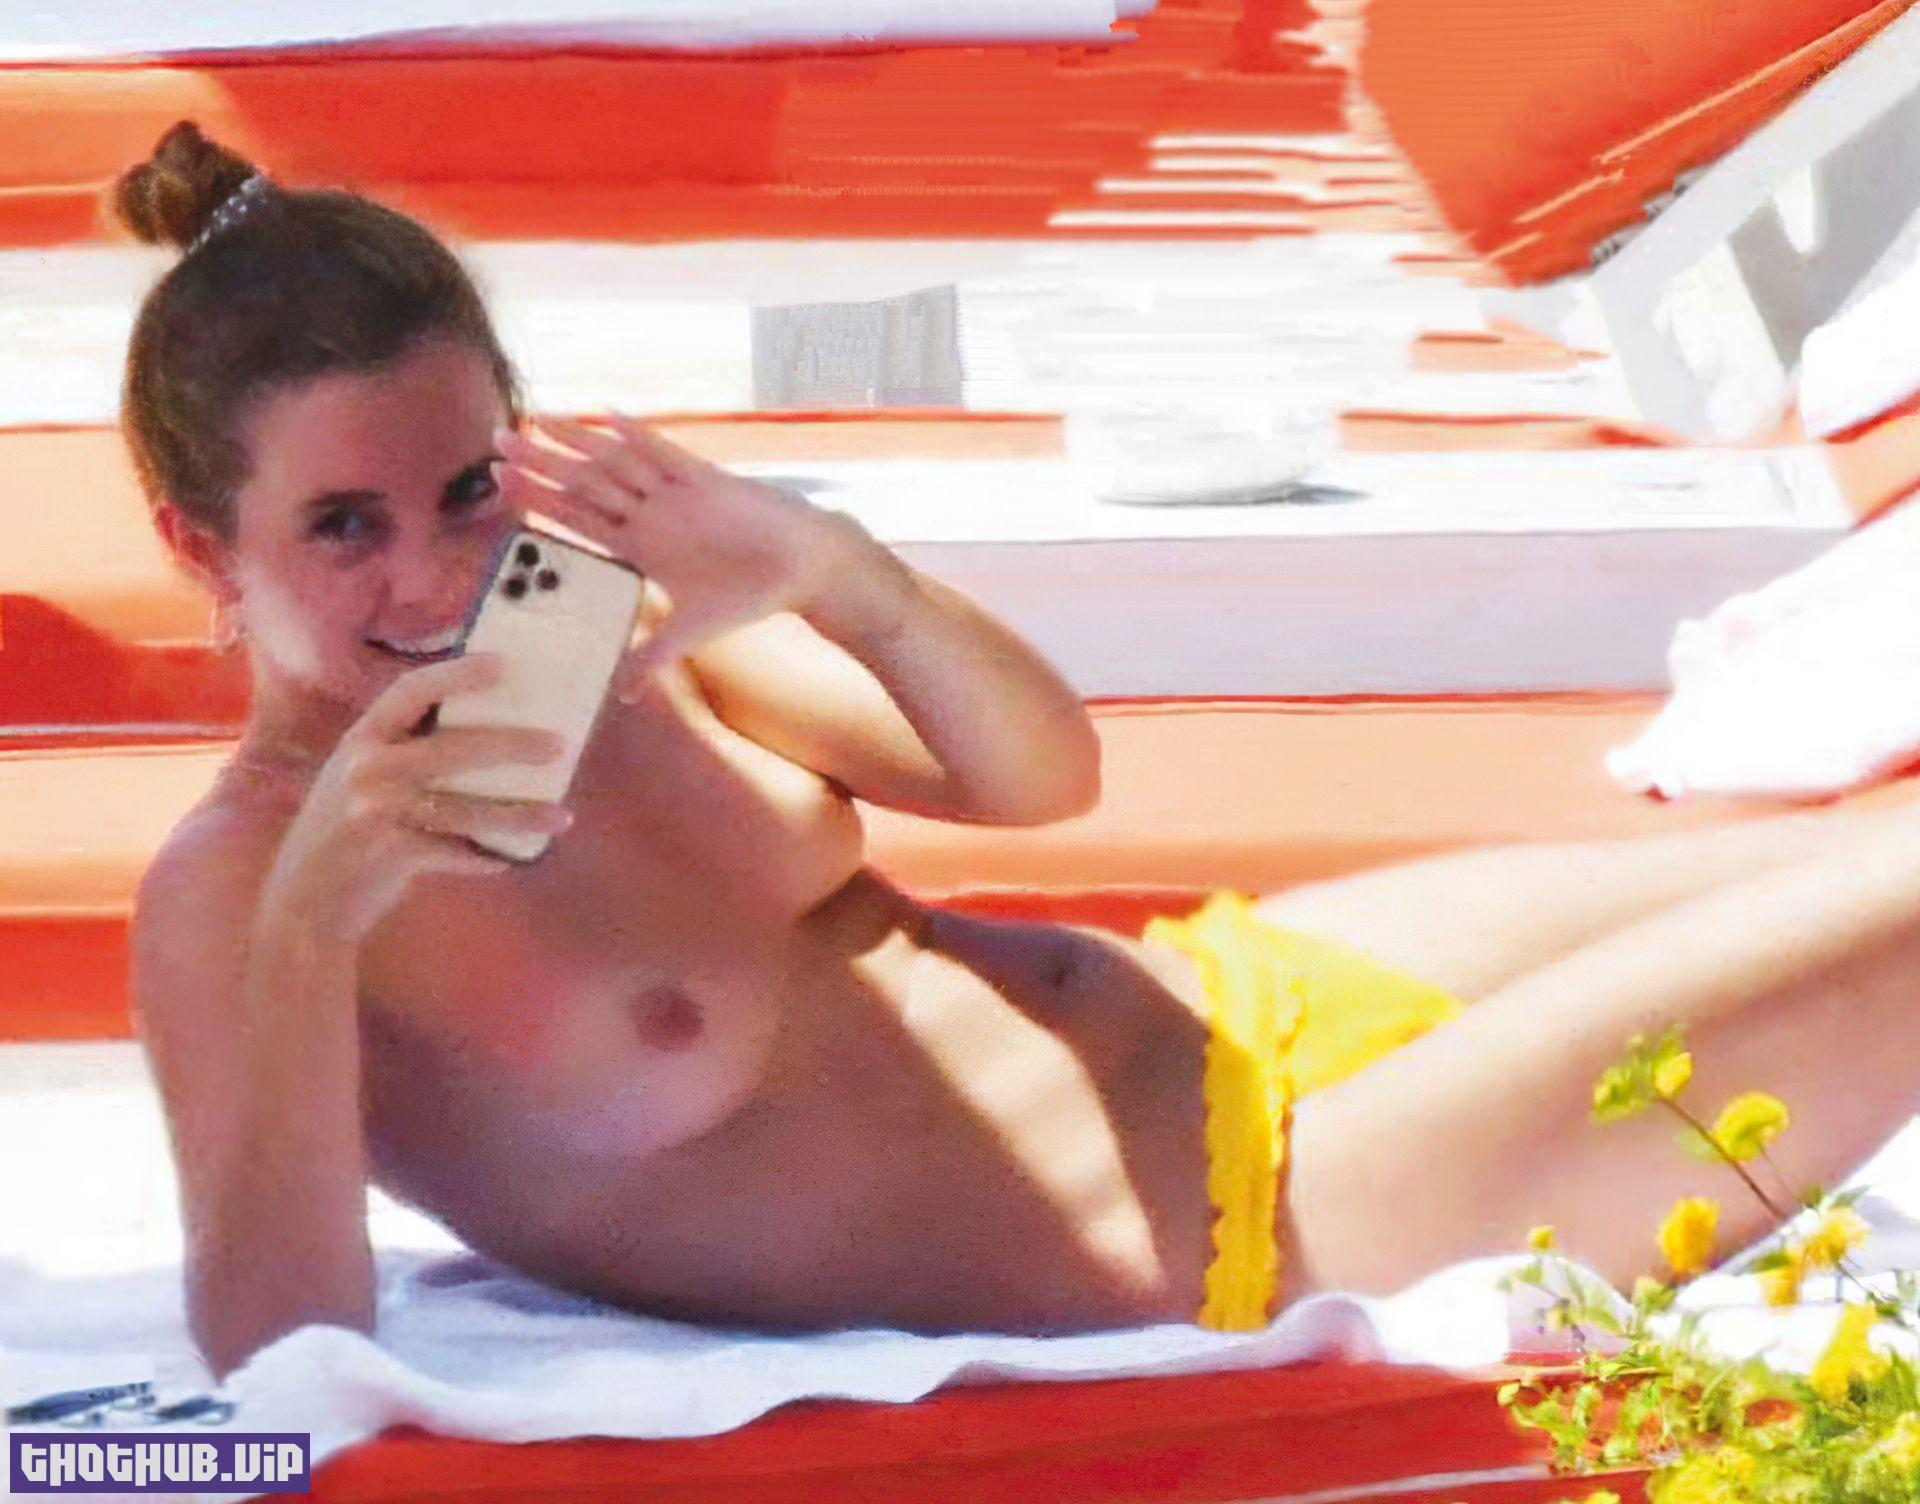 Emma Watson Took Off Her Top And Shamelessly Showed Her Small Naked Tits